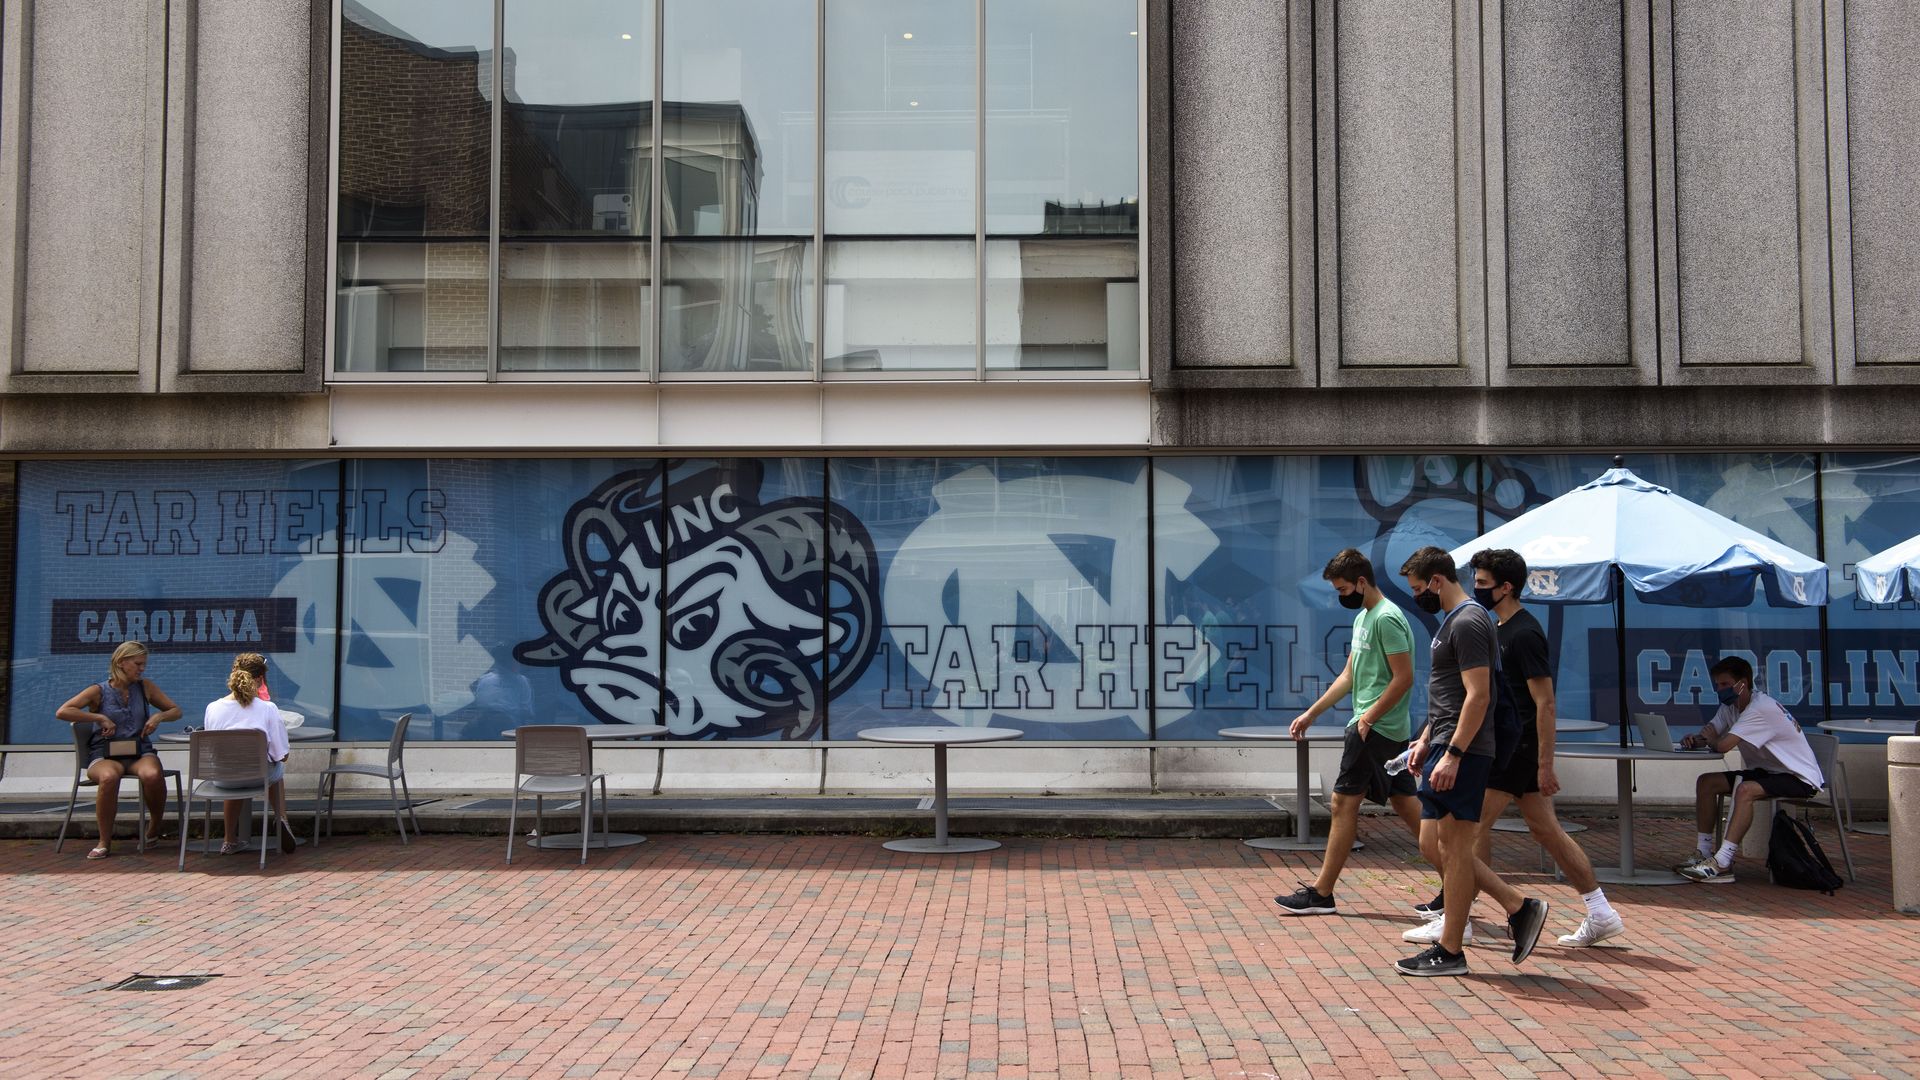 Students walk through the campus of the University of North Carolina at Chapel Hill on August 18, 2020 in Chapel Hill, North Carolina.